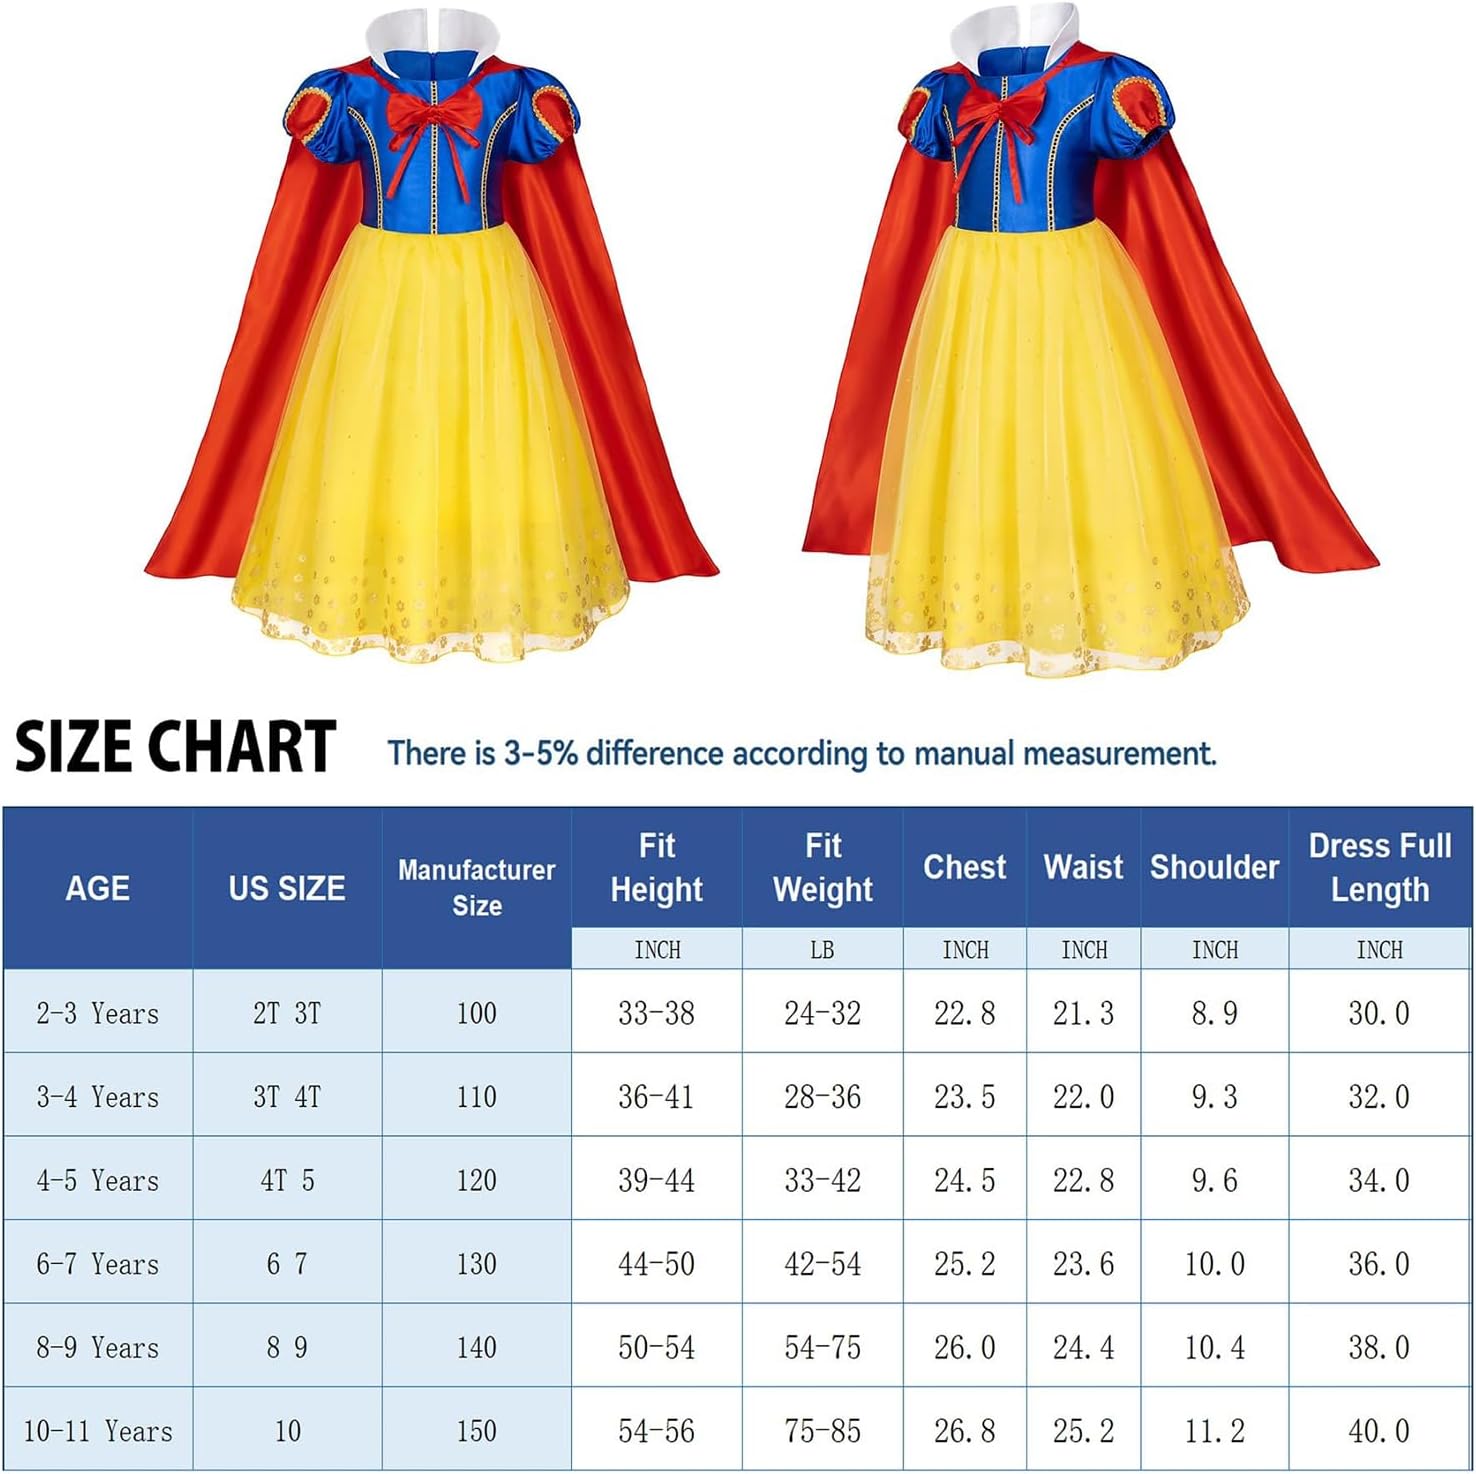 0TO1 Princess Dress, Princess Dress up Accessories, Kid Girls Snow White Dress Princess, for Kids Toddler Princess Dress Up Costume Outfits Cosplay Princess Party Tutu Dresses Kit (Size 51in)